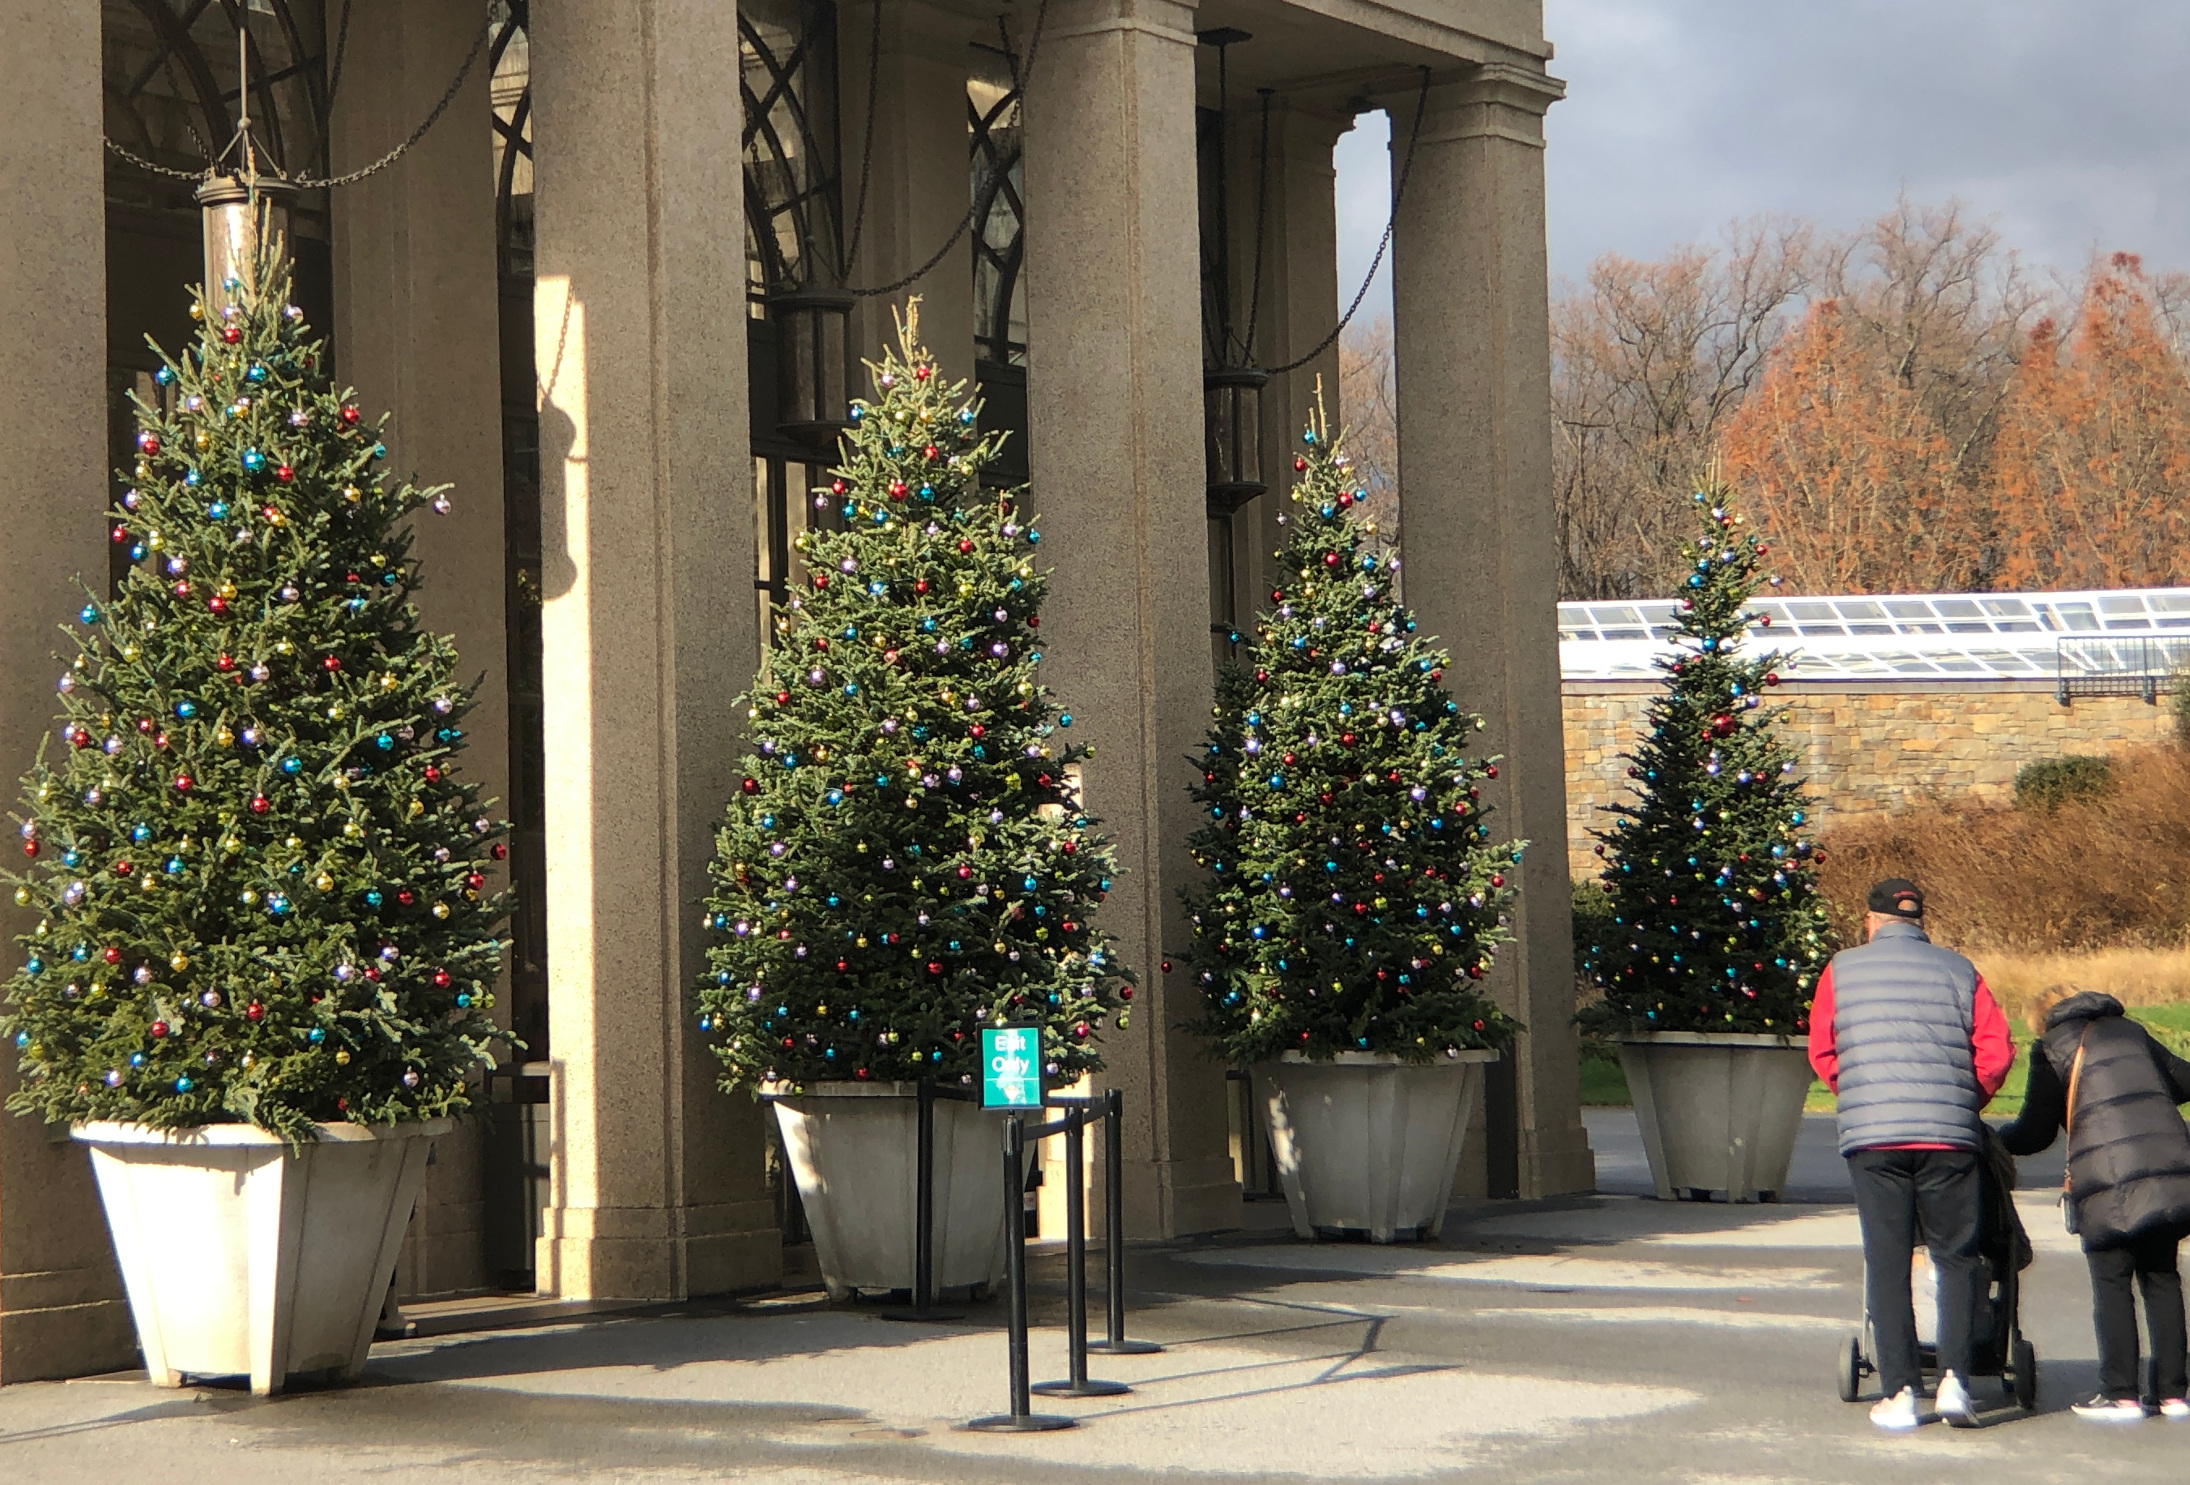 ‘A Longwood Christmas’ is Ablaze With Holiday Color